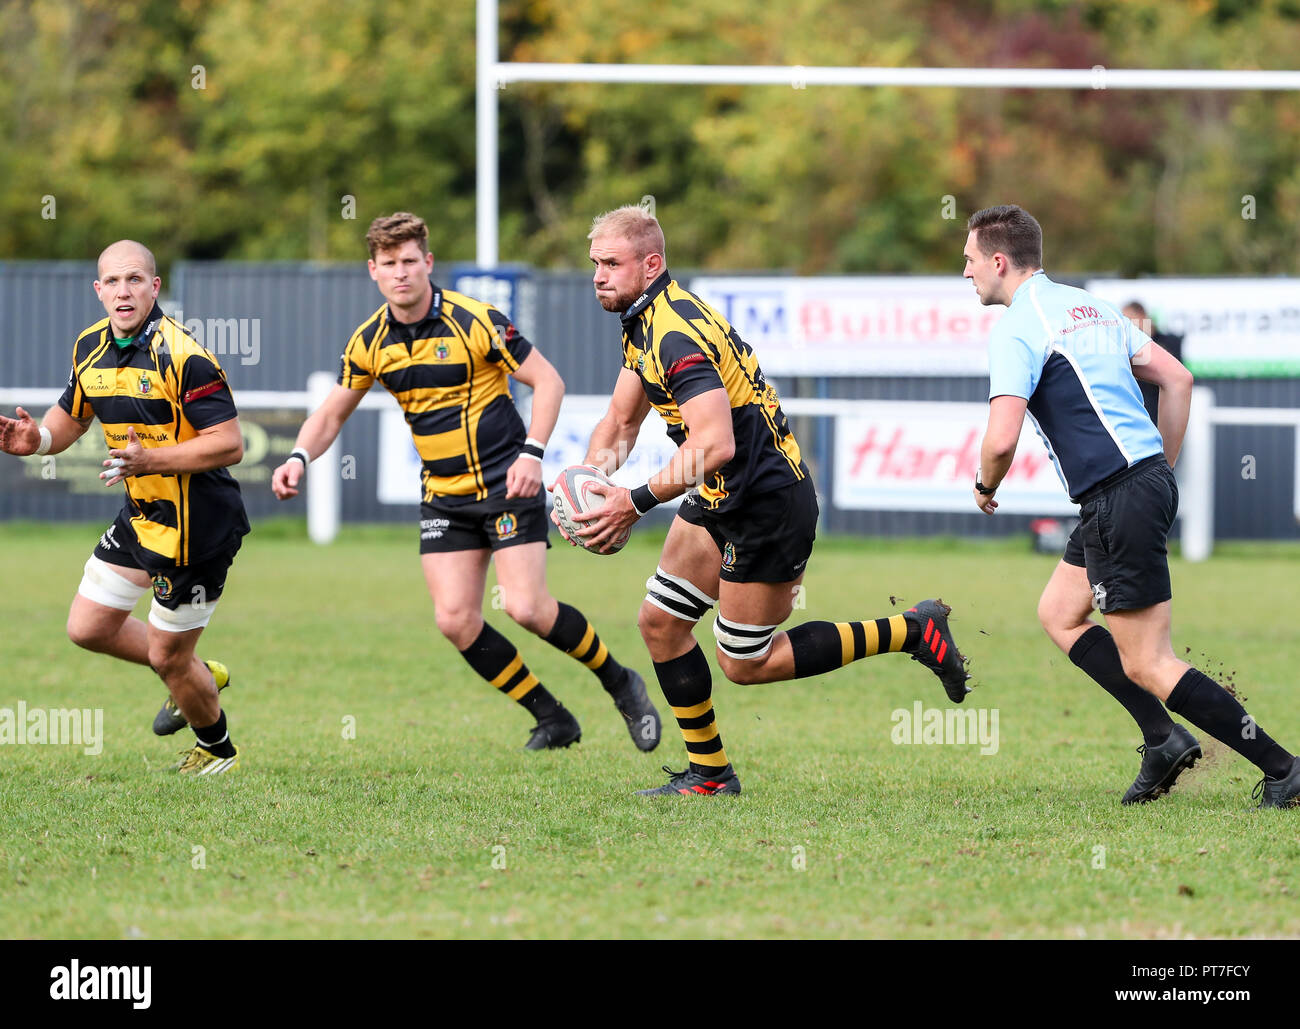 Leicester, England. Rugby Union, Hinckley rfc v South Leicester rfc.   Hinckley captain Alex Salt on the charge  during the RFU National League 2 North (NL2N) game played at the Leicester  Road Stadium.  © Phil Hutchinson / Alamy Live News Stock Photo